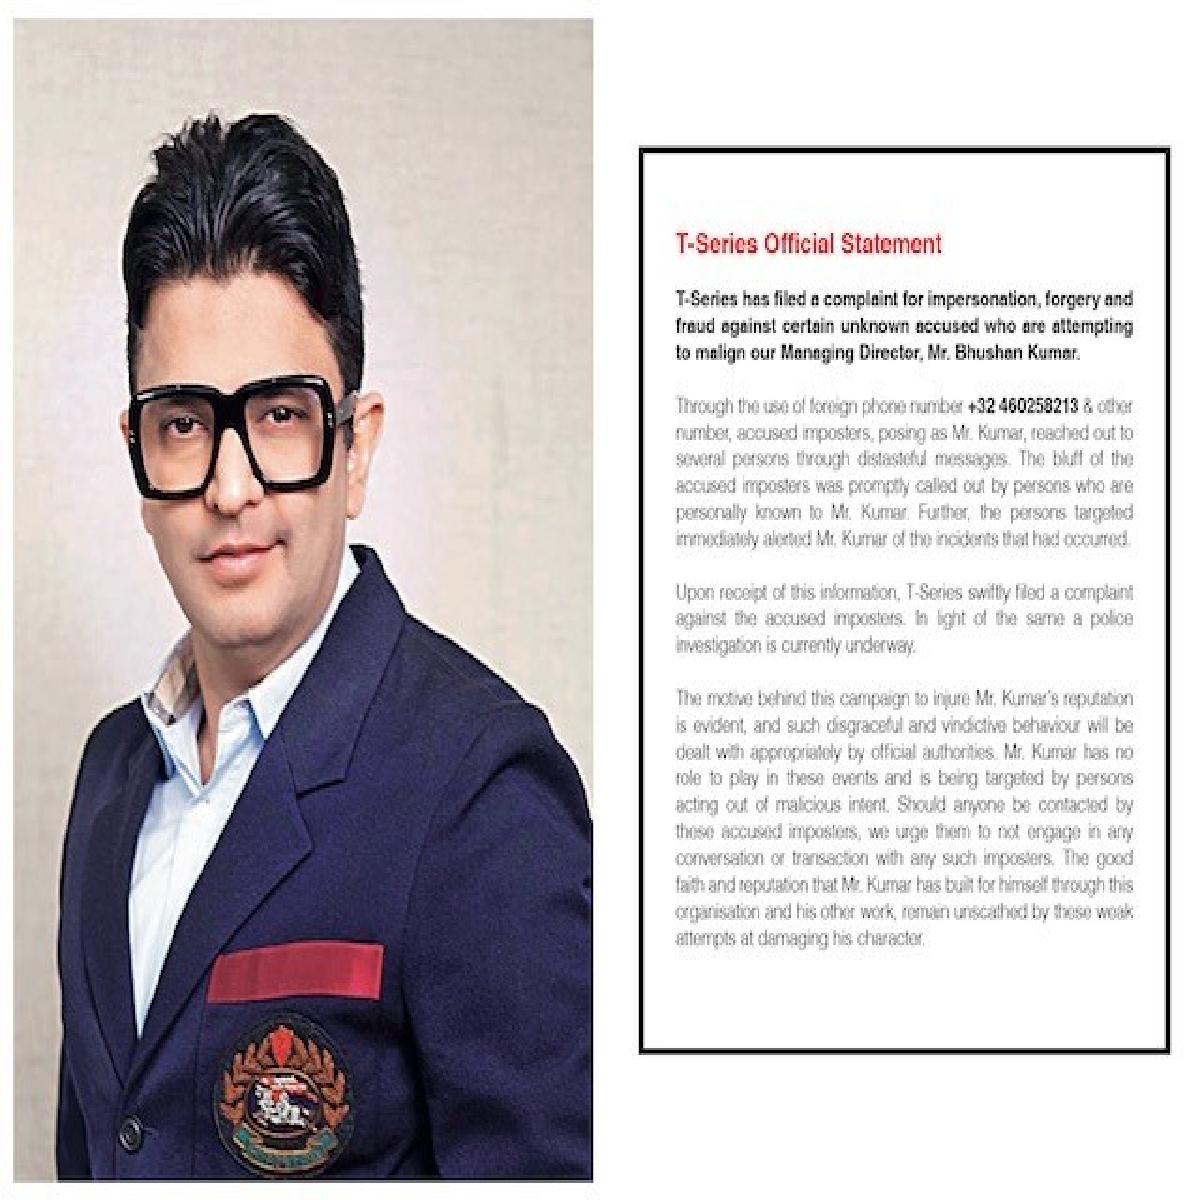 T-Series Issues A Statement Regarding Someone Impersonating Bhushan Kumar And Sending Inappropriate Messages